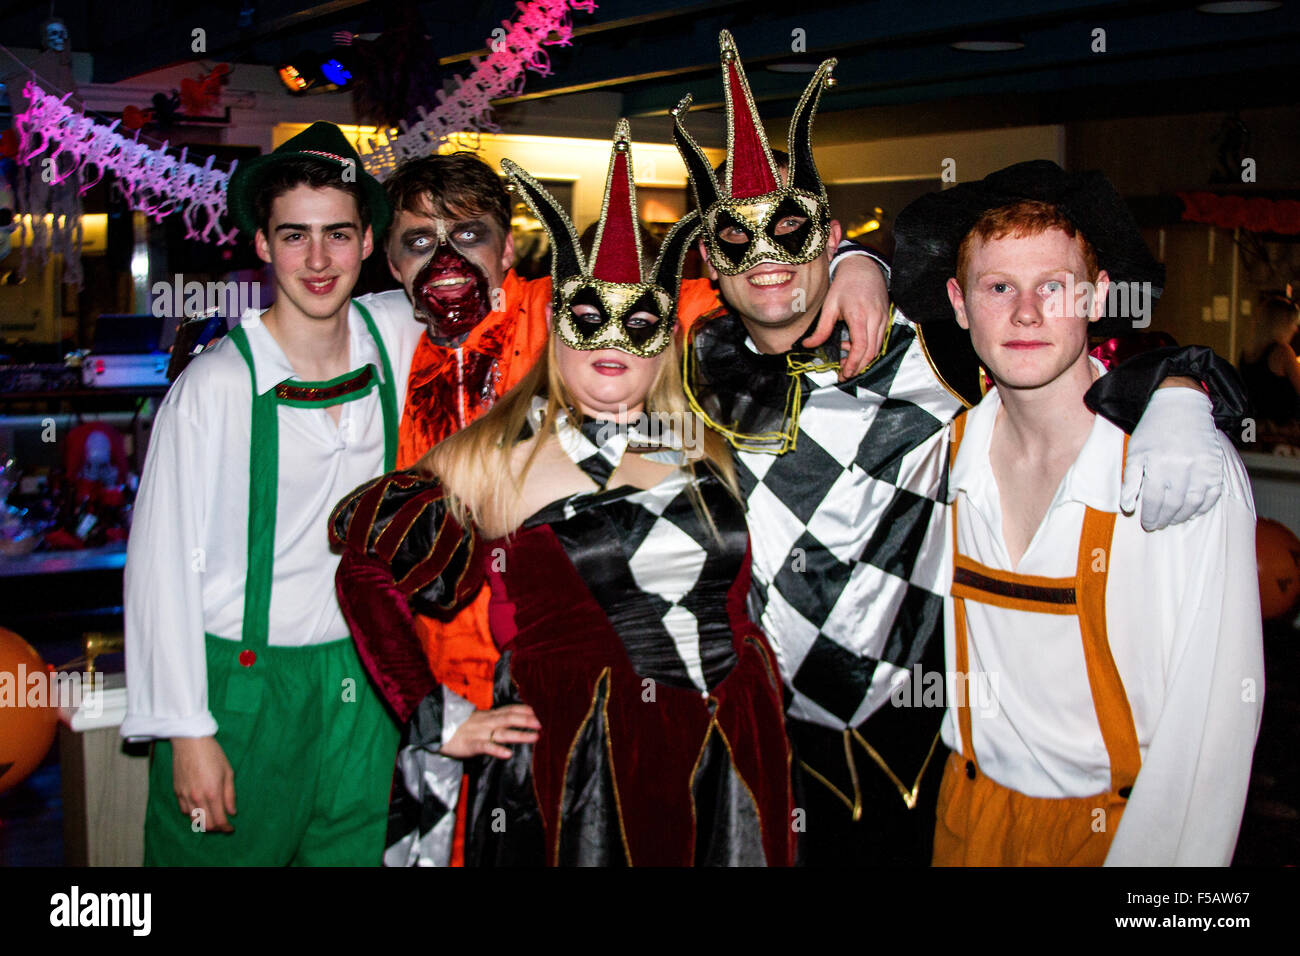 Dundee, Tayside, Scotland, UK, 31st October 2015 Halloween fundraiser event  for the special Bay Baby`s Unit at Ninewells Hospital which was held at the  Downfield Social Club in Dundee. © Dundee Photographics /